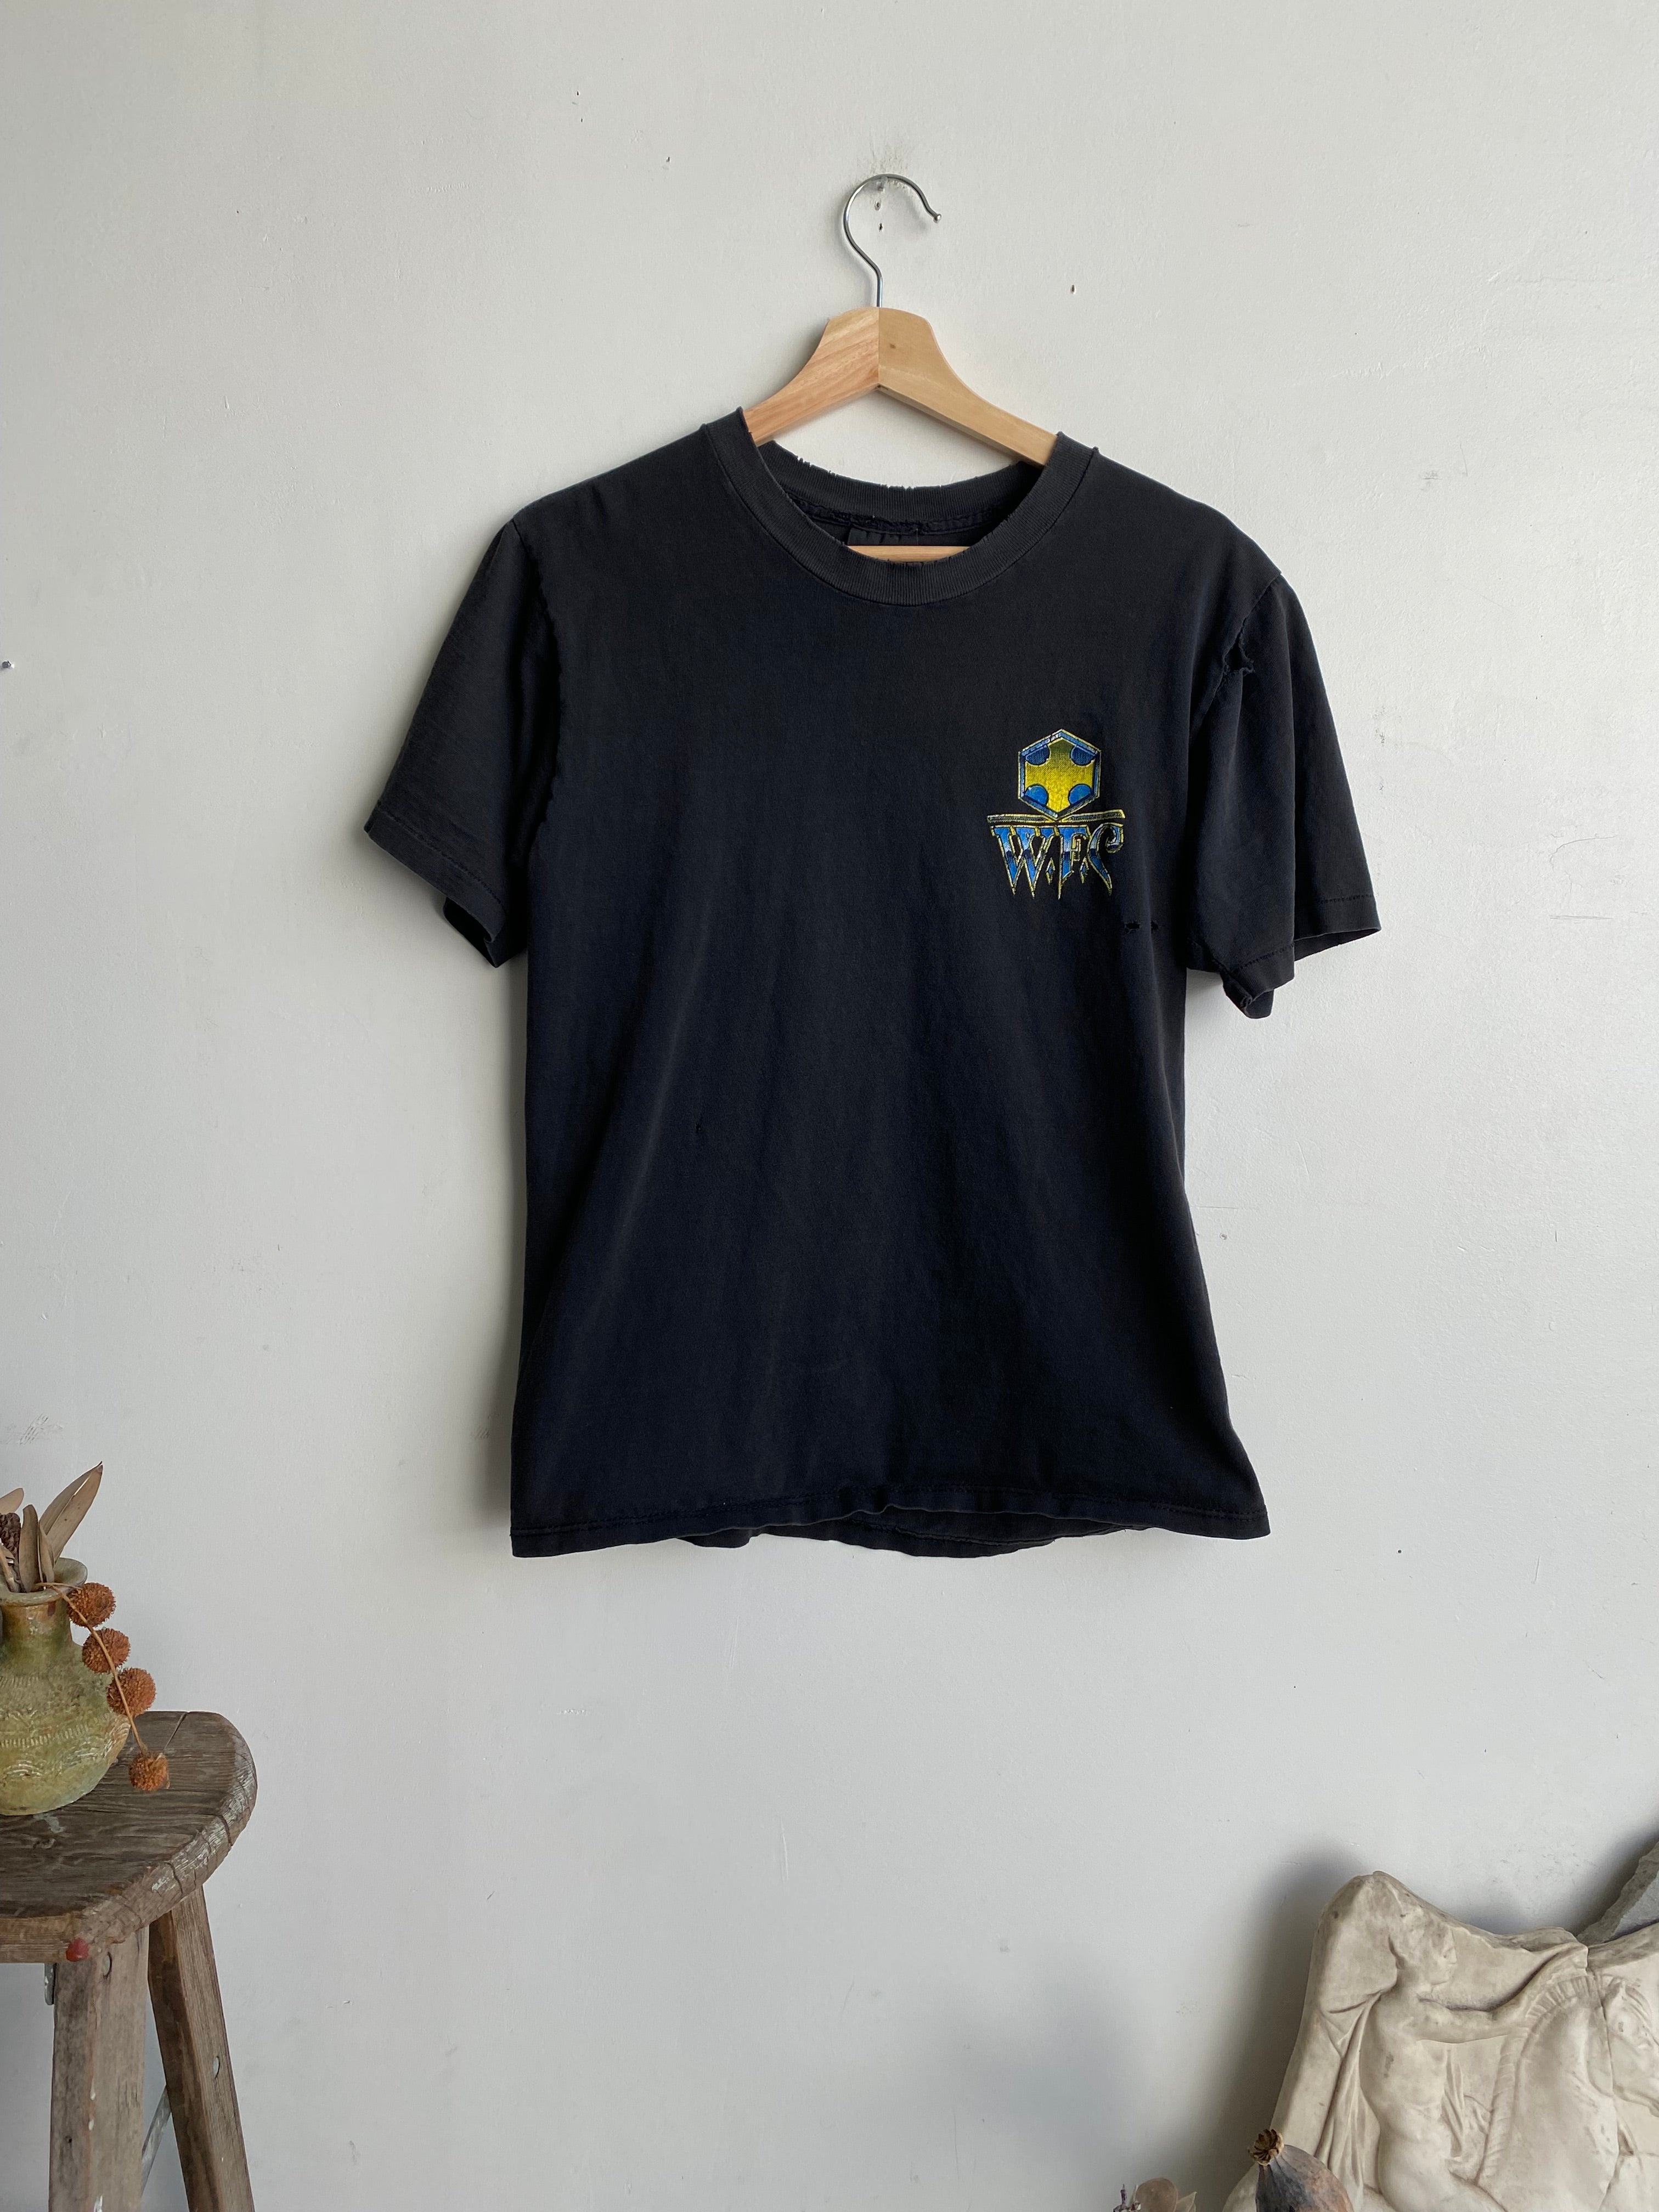 1980s Warriors for Christ Tee (S/M)